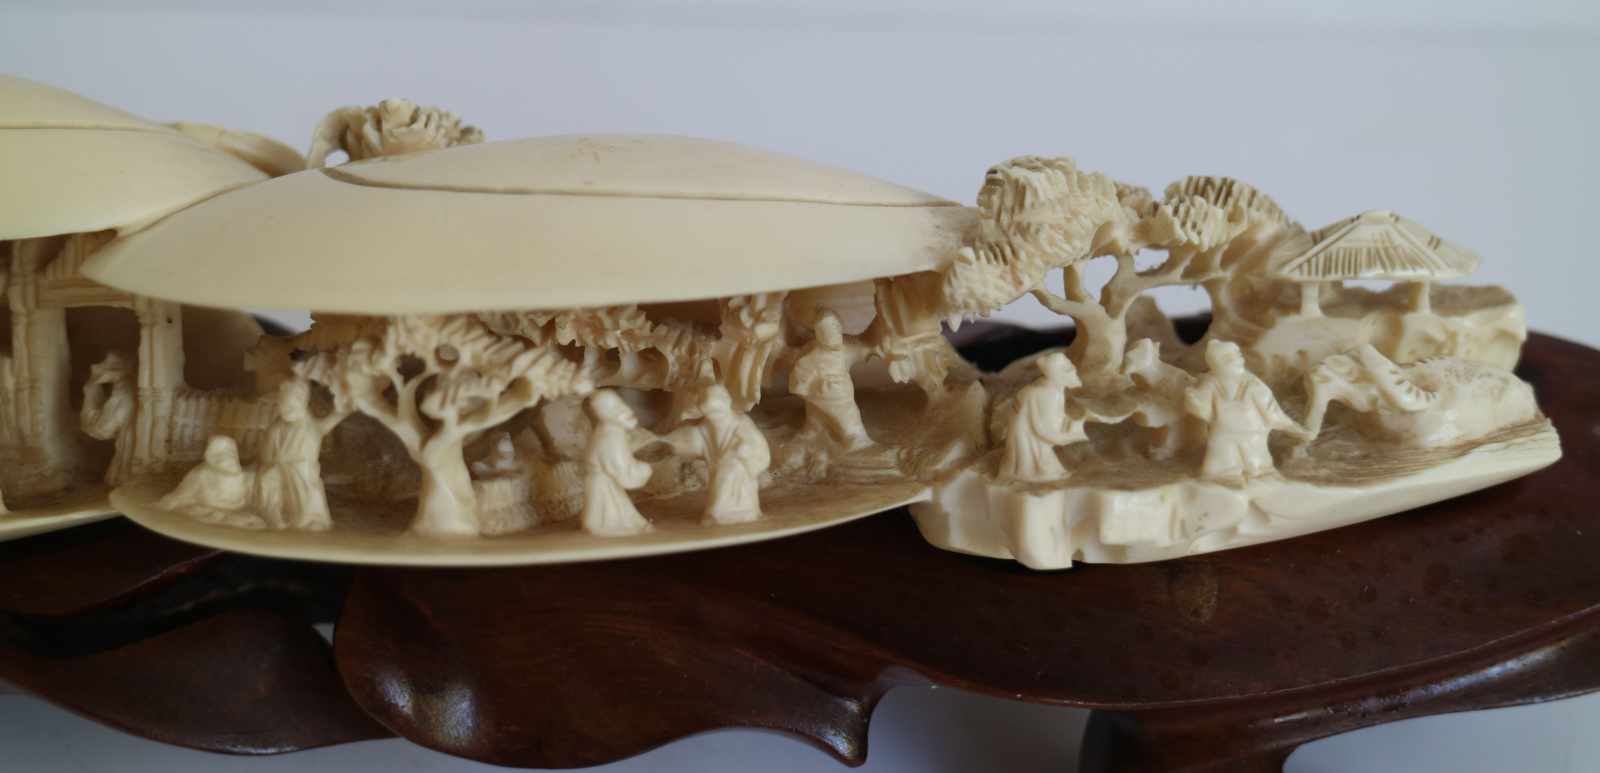 Ivory carving depicting rural scenes inside two clams China, around 1930 L 23,5 cm (without base) - Image 3 of 4